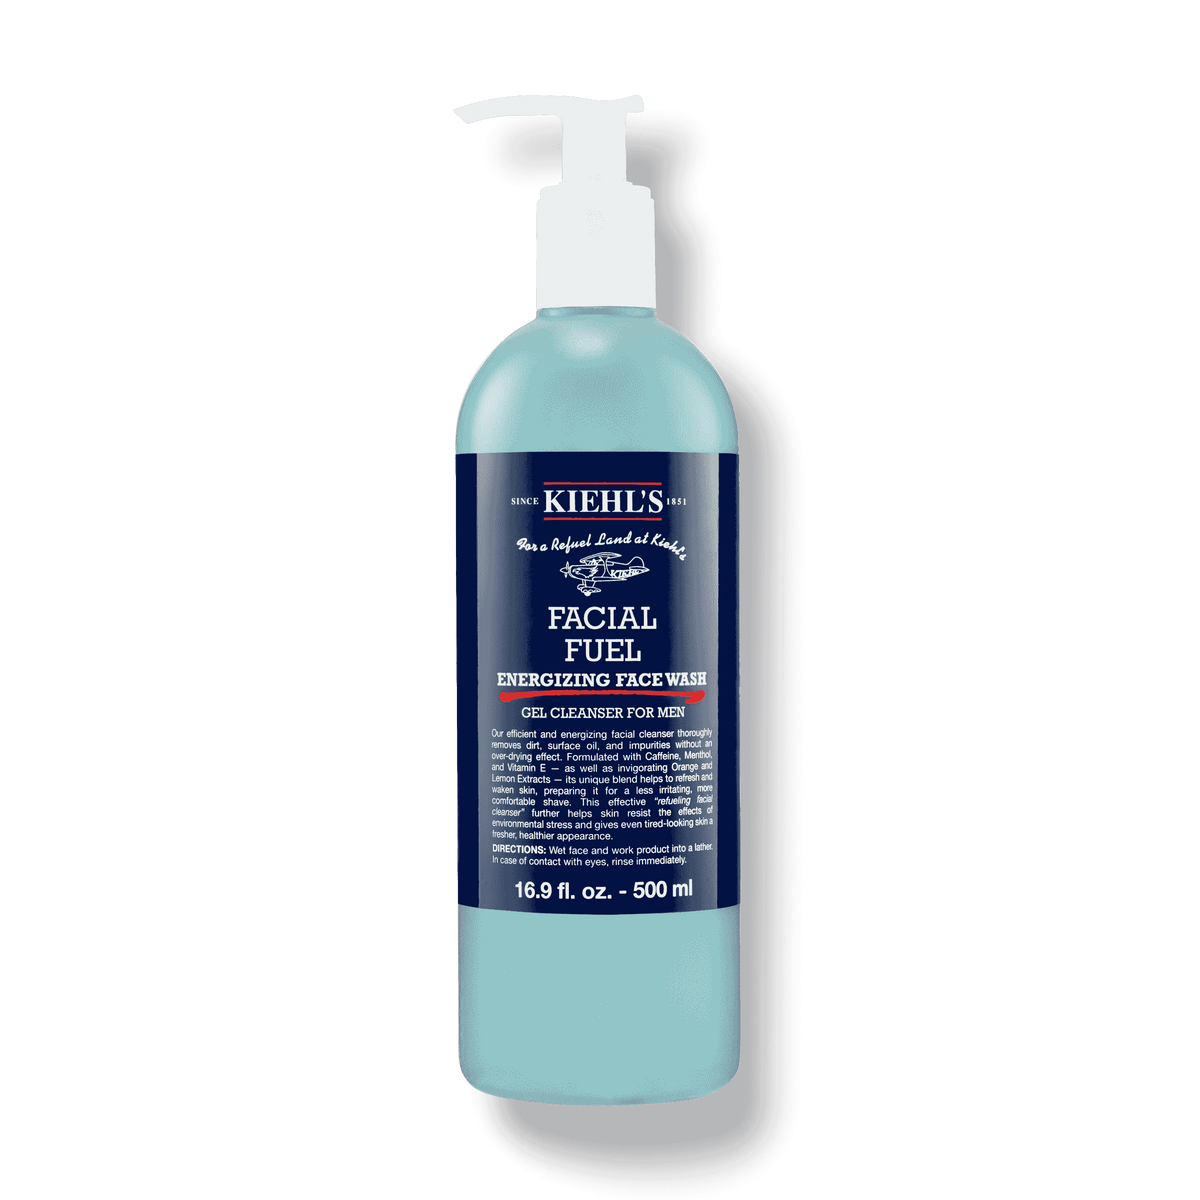 KIEHL'S FACIAL FUEL DAILY ENERGIZING FACE WASH